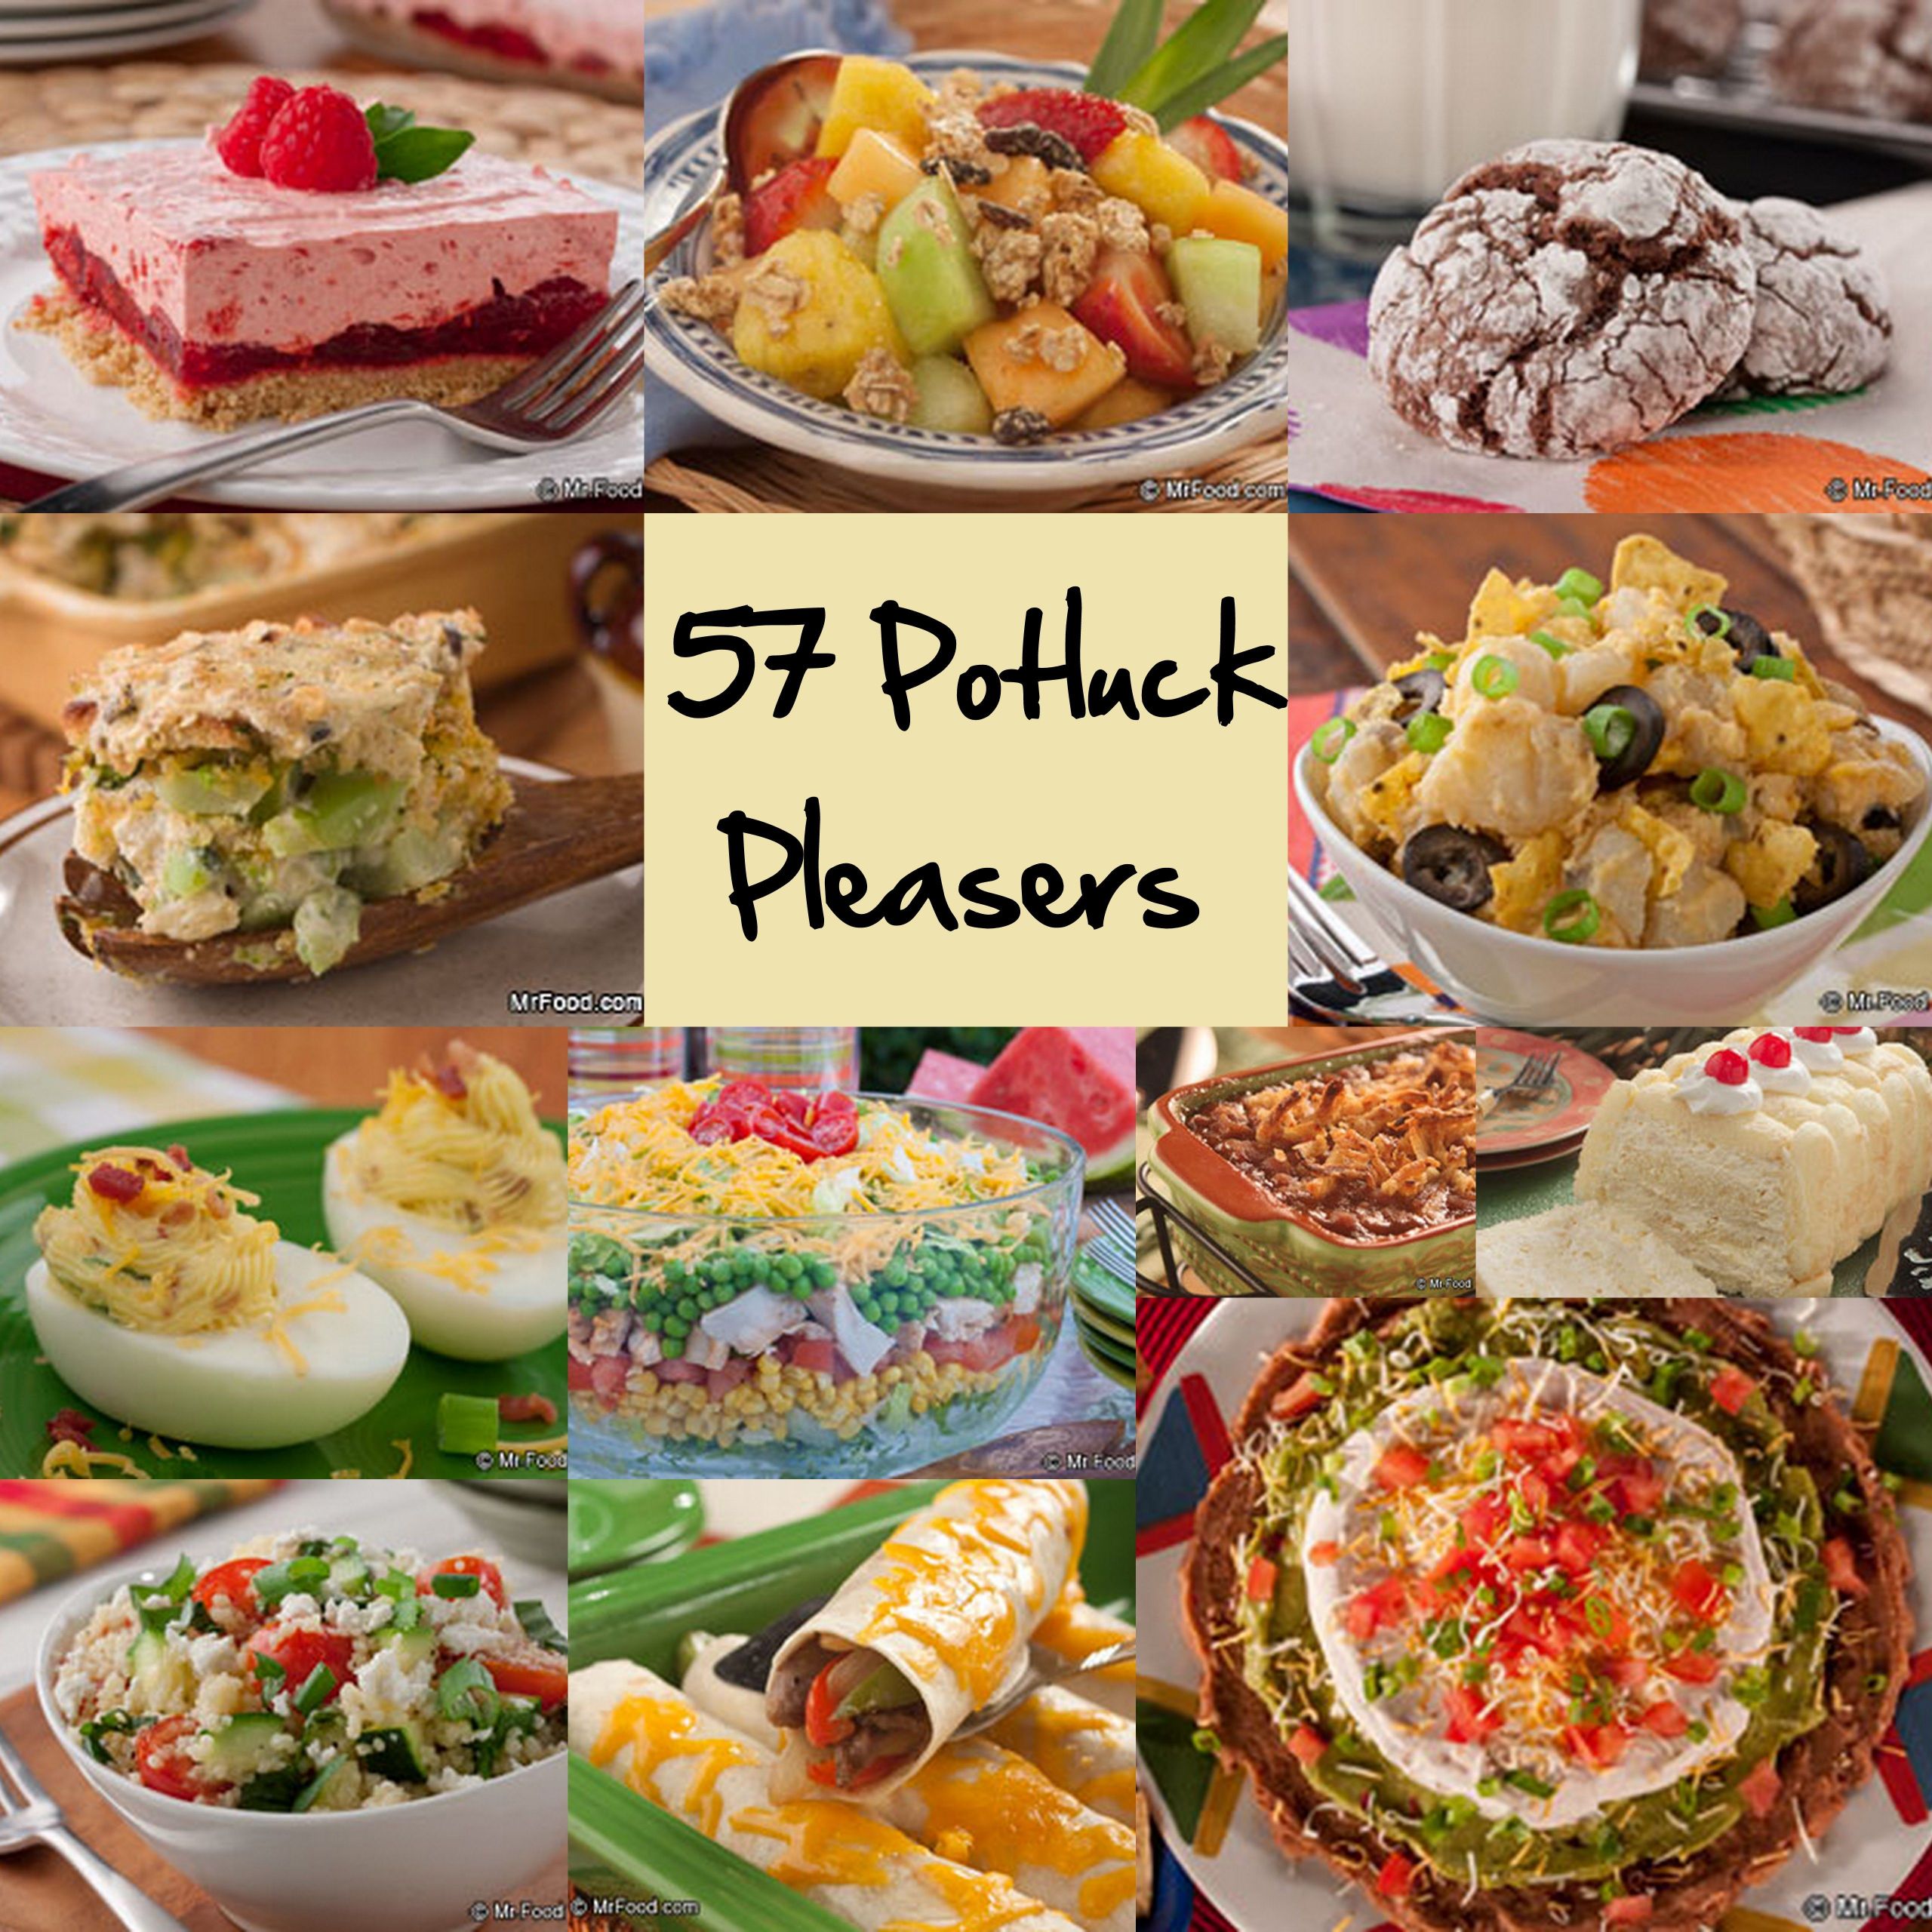 Easy Potluck Main Dishes
 The next time you need that perfect potluck dish for a